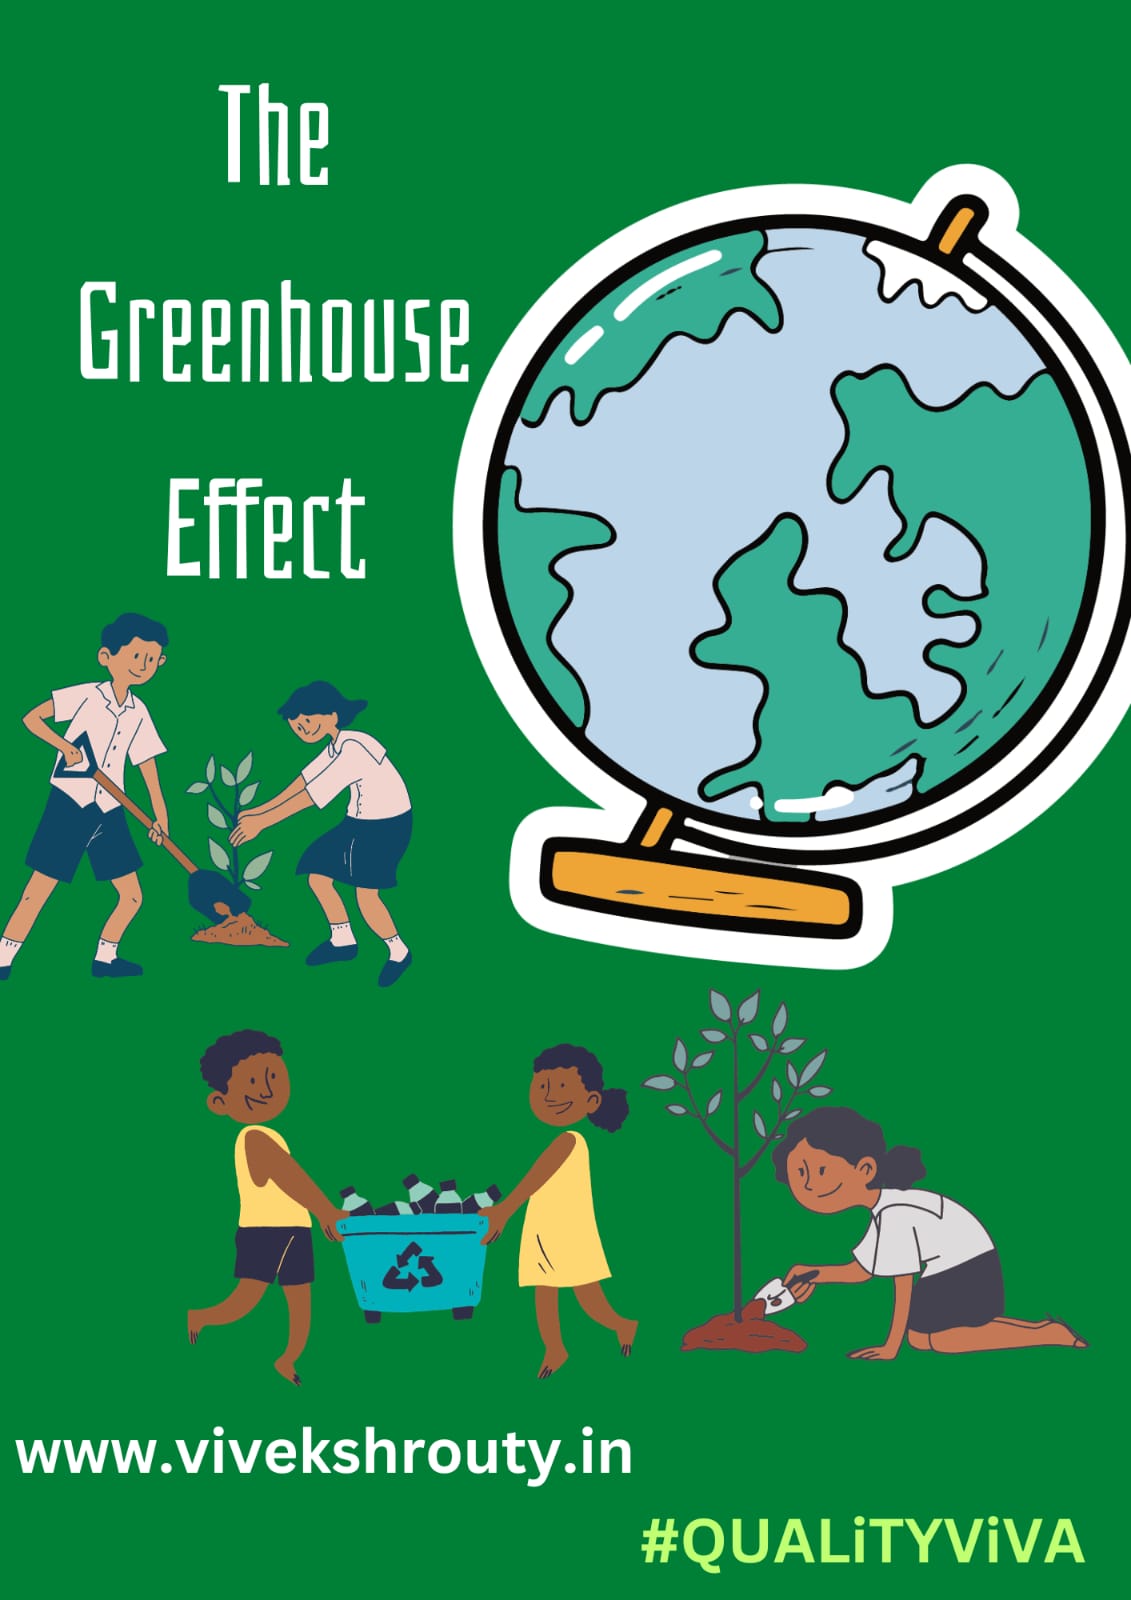 THE GREEN HOUSE EFFECT